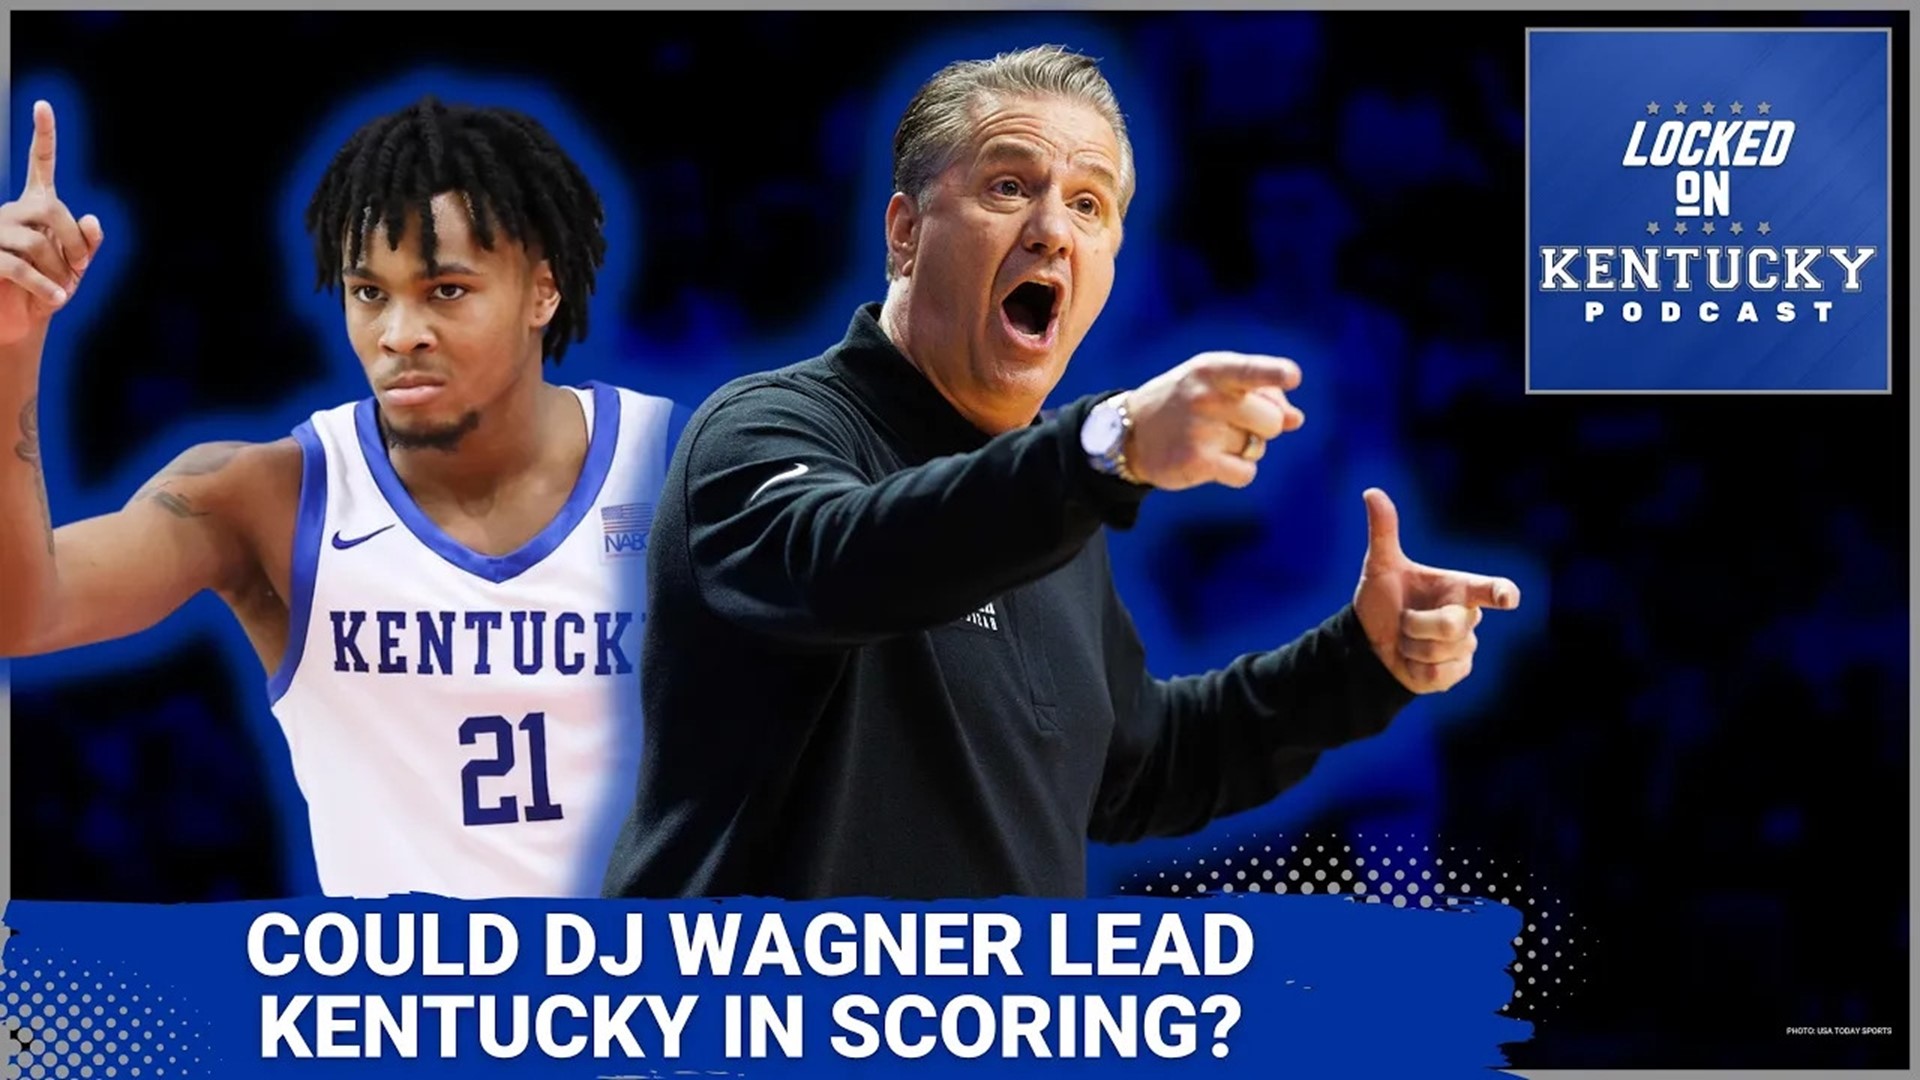 DJ Wagner will be the lead point guard for Kentucky basketball this upcoming season. How many points per game will he average for the Kentucky Wildcats?